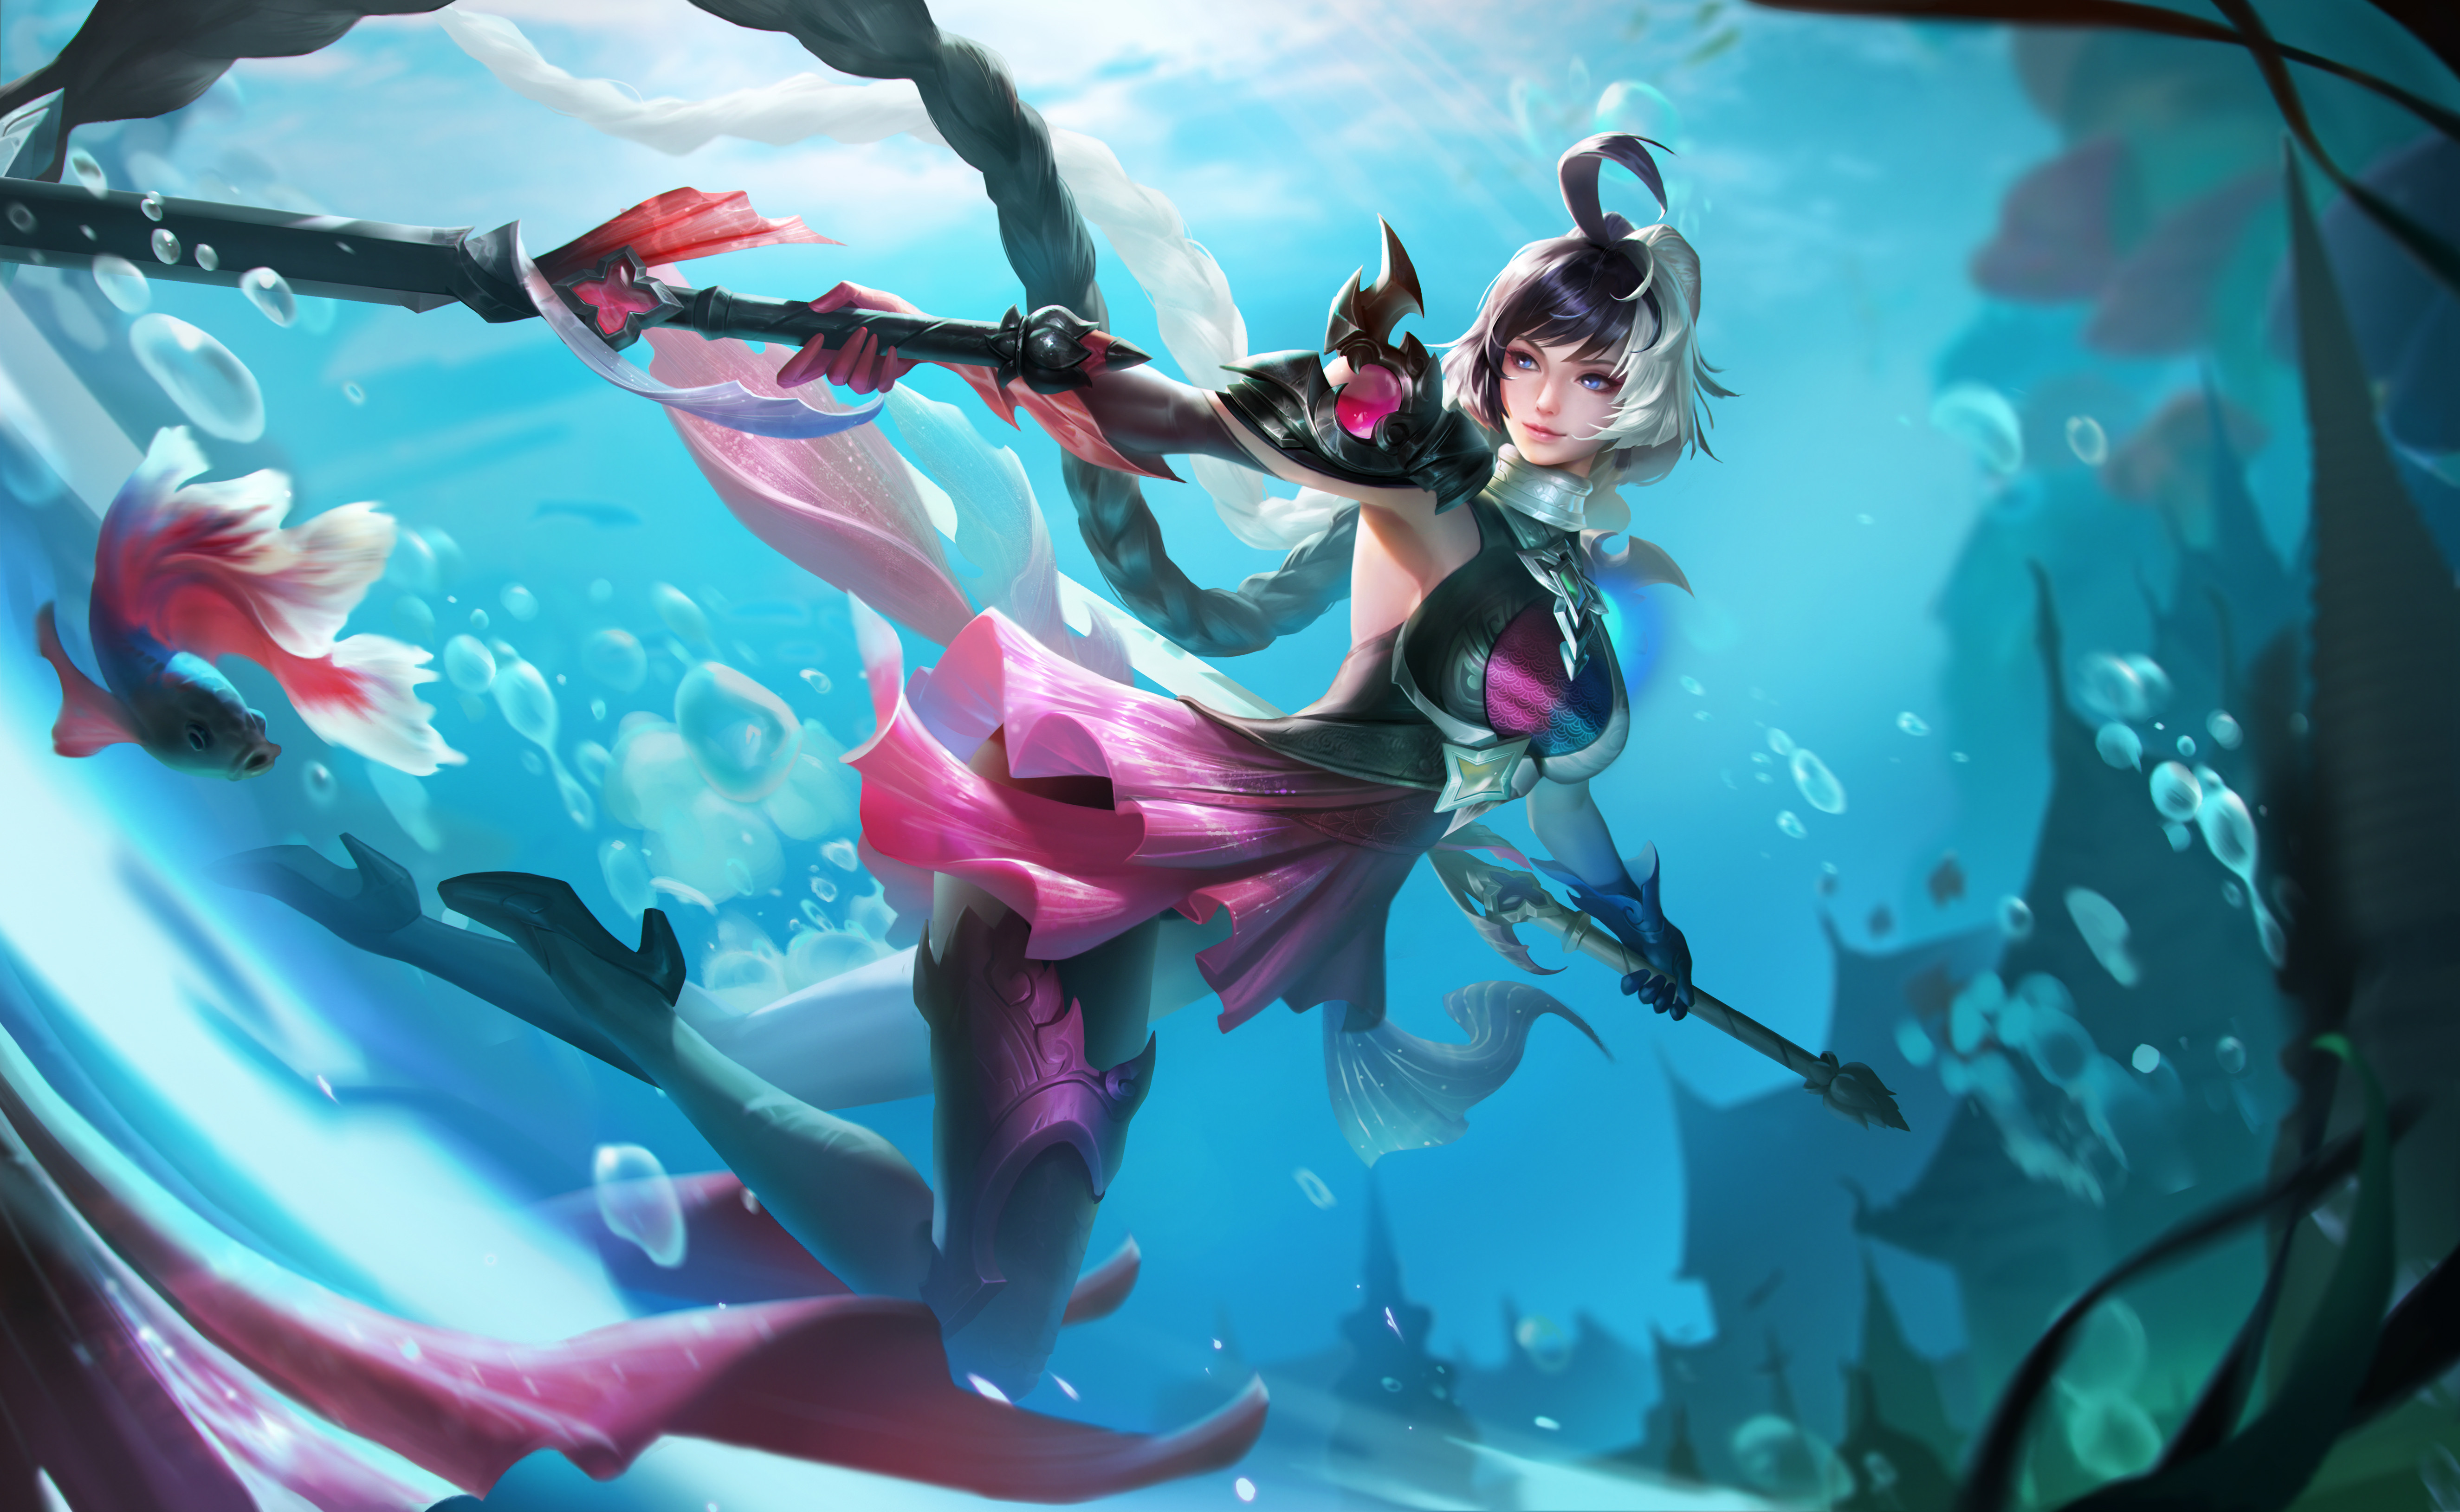 Anime 5300x3258 Arena of Valor video games video game art video game characters video game girls water underwater fish animals two tone hair weapon